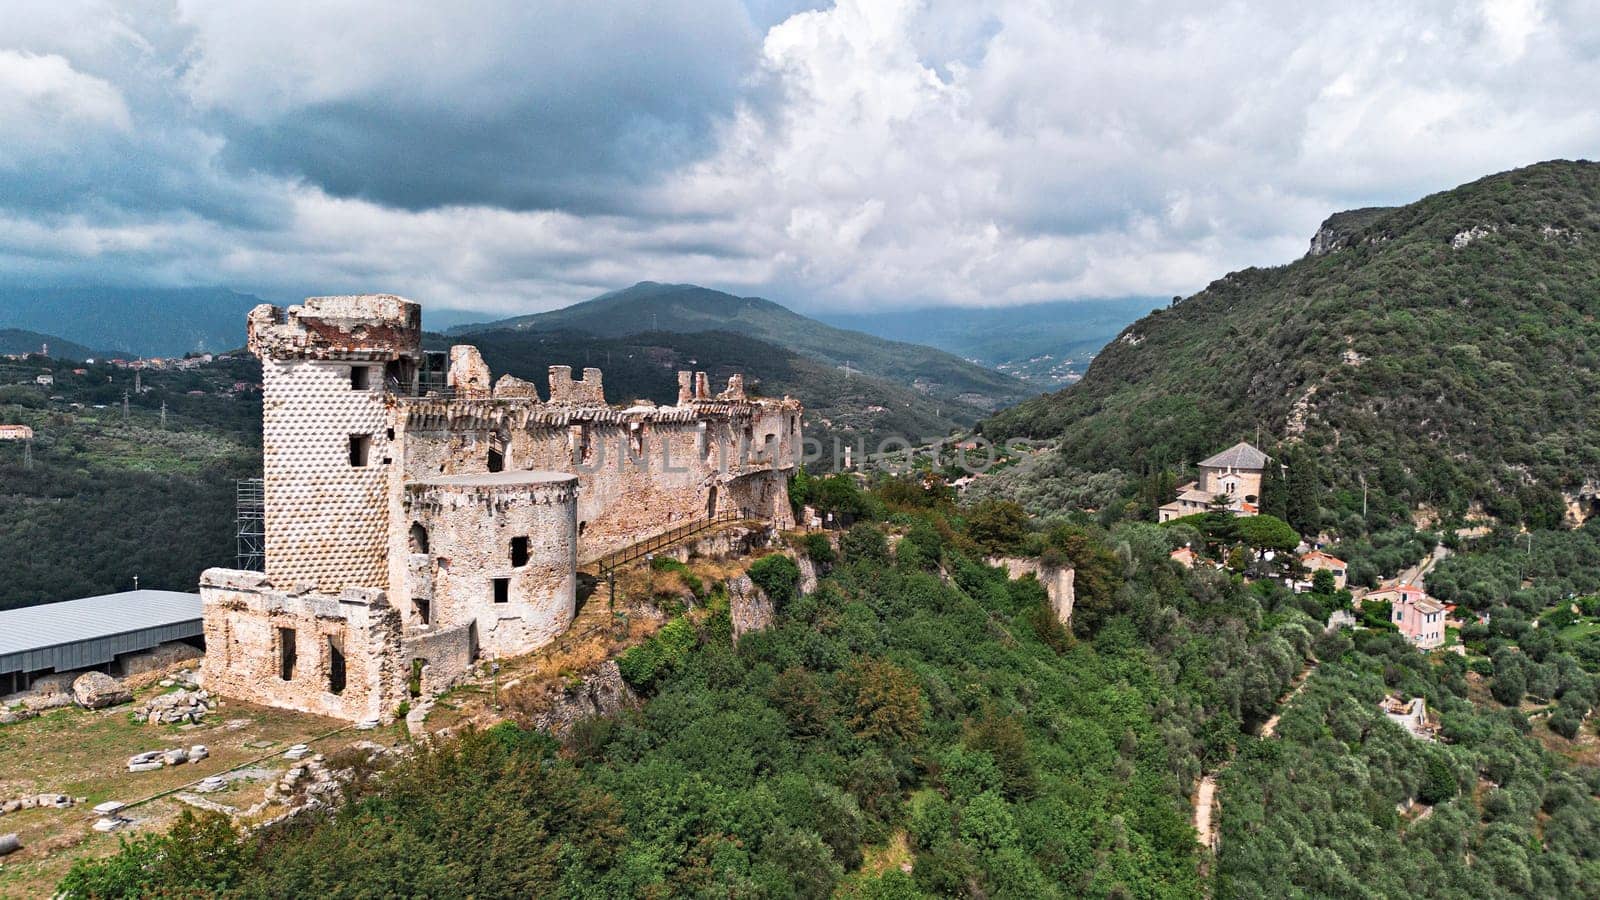 In the village of Finale Ligure, there are the historic ruins of Castel Govone. by contas